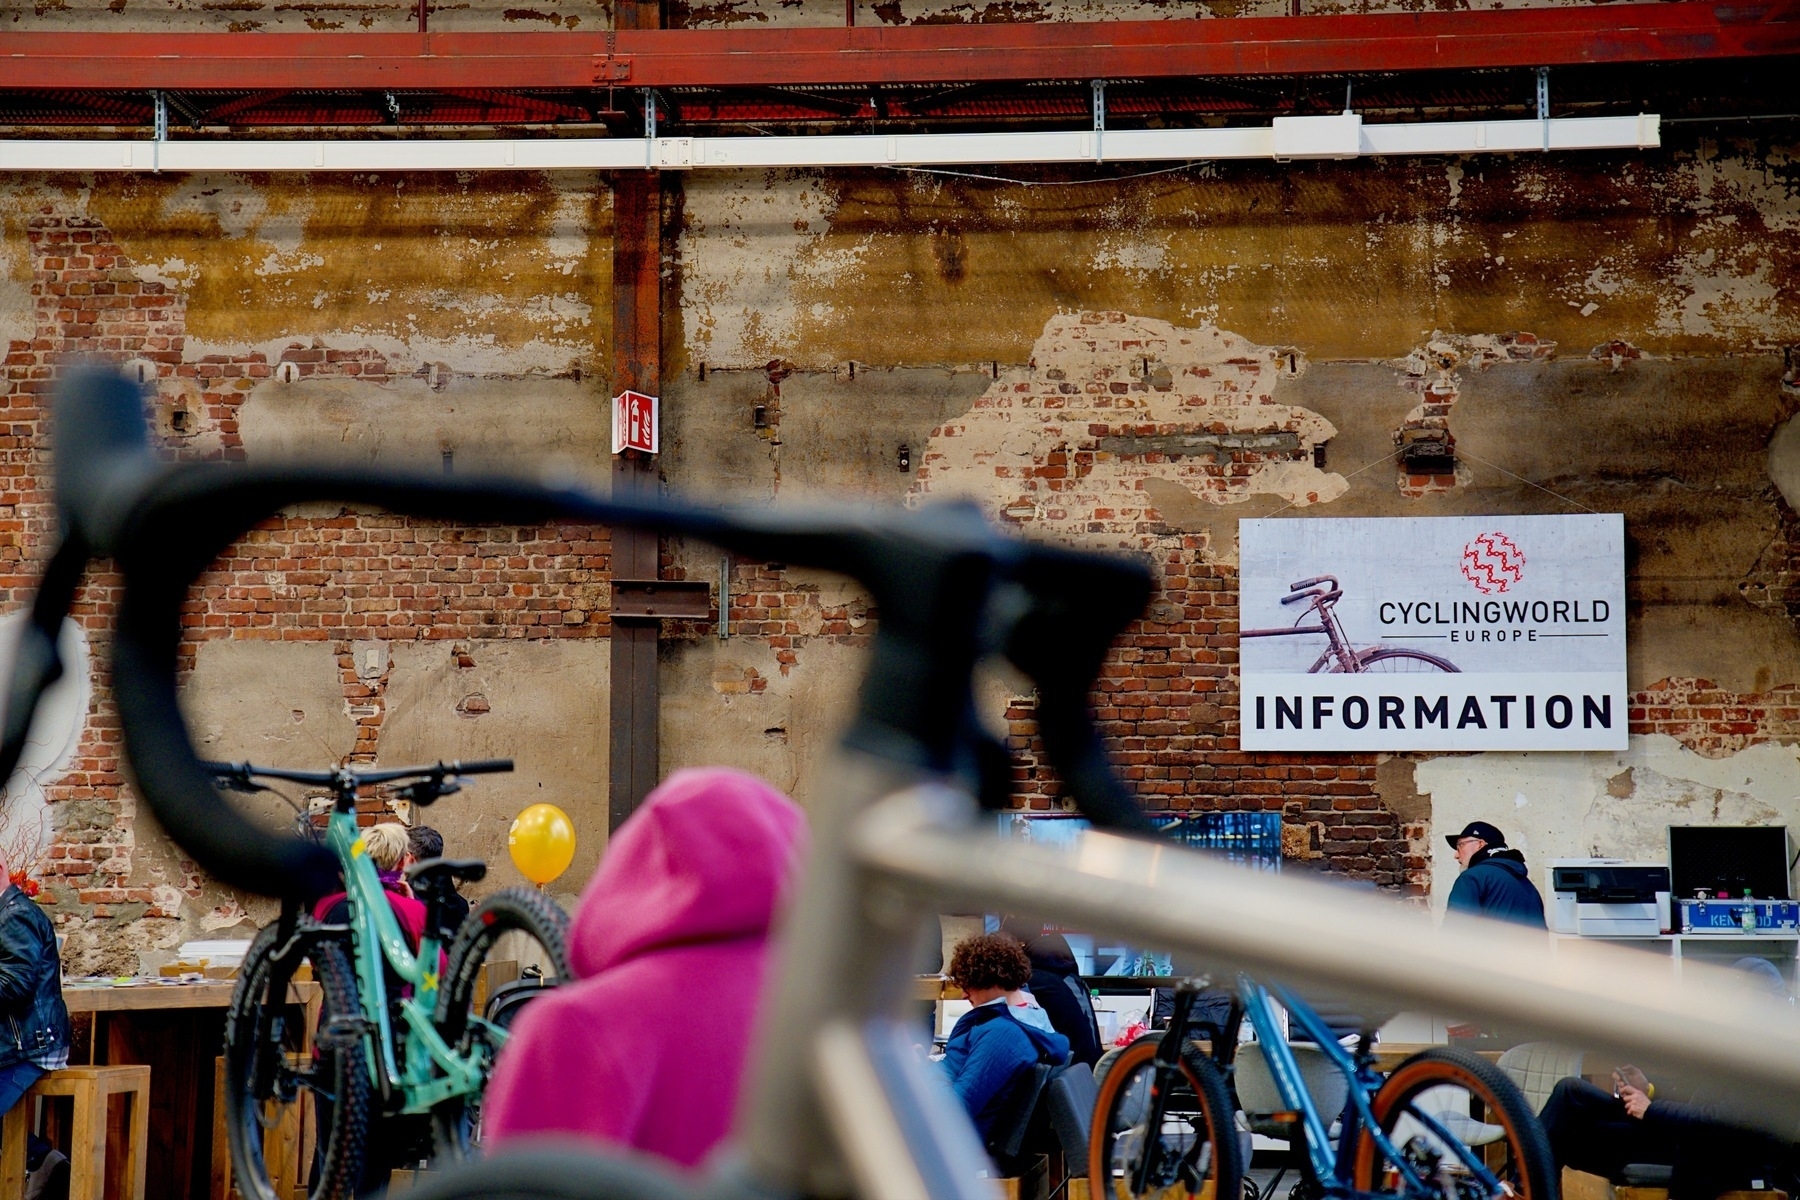 A Cyclingworld information sign on a brick wall. A bicycle in the foreground.